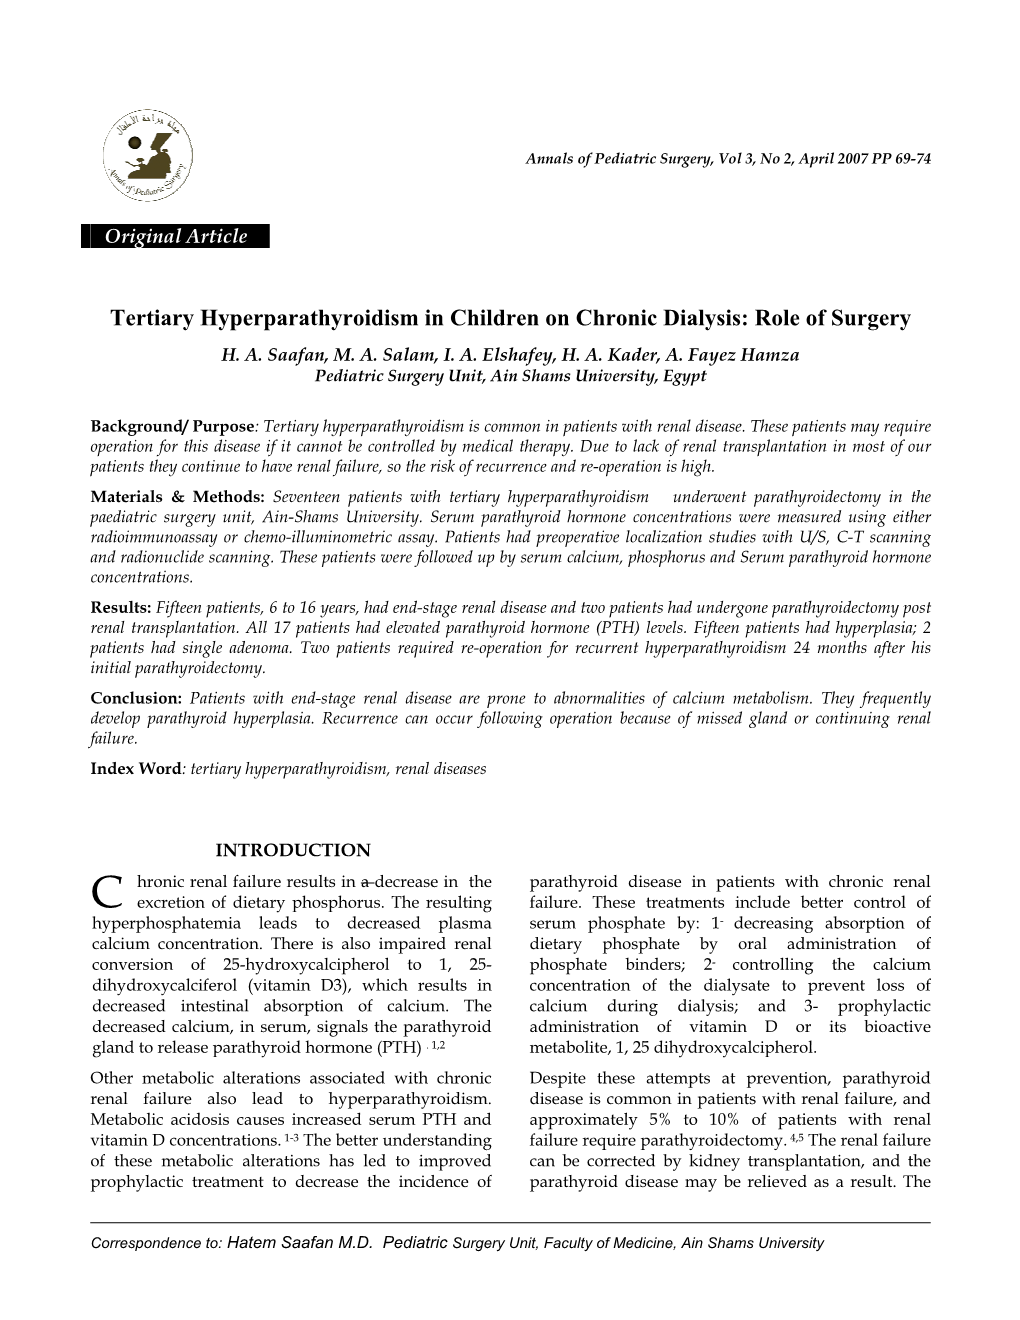 Tertiary Hyperparathyroidism in Children on Chronic Dialysis: Role of Surgery H